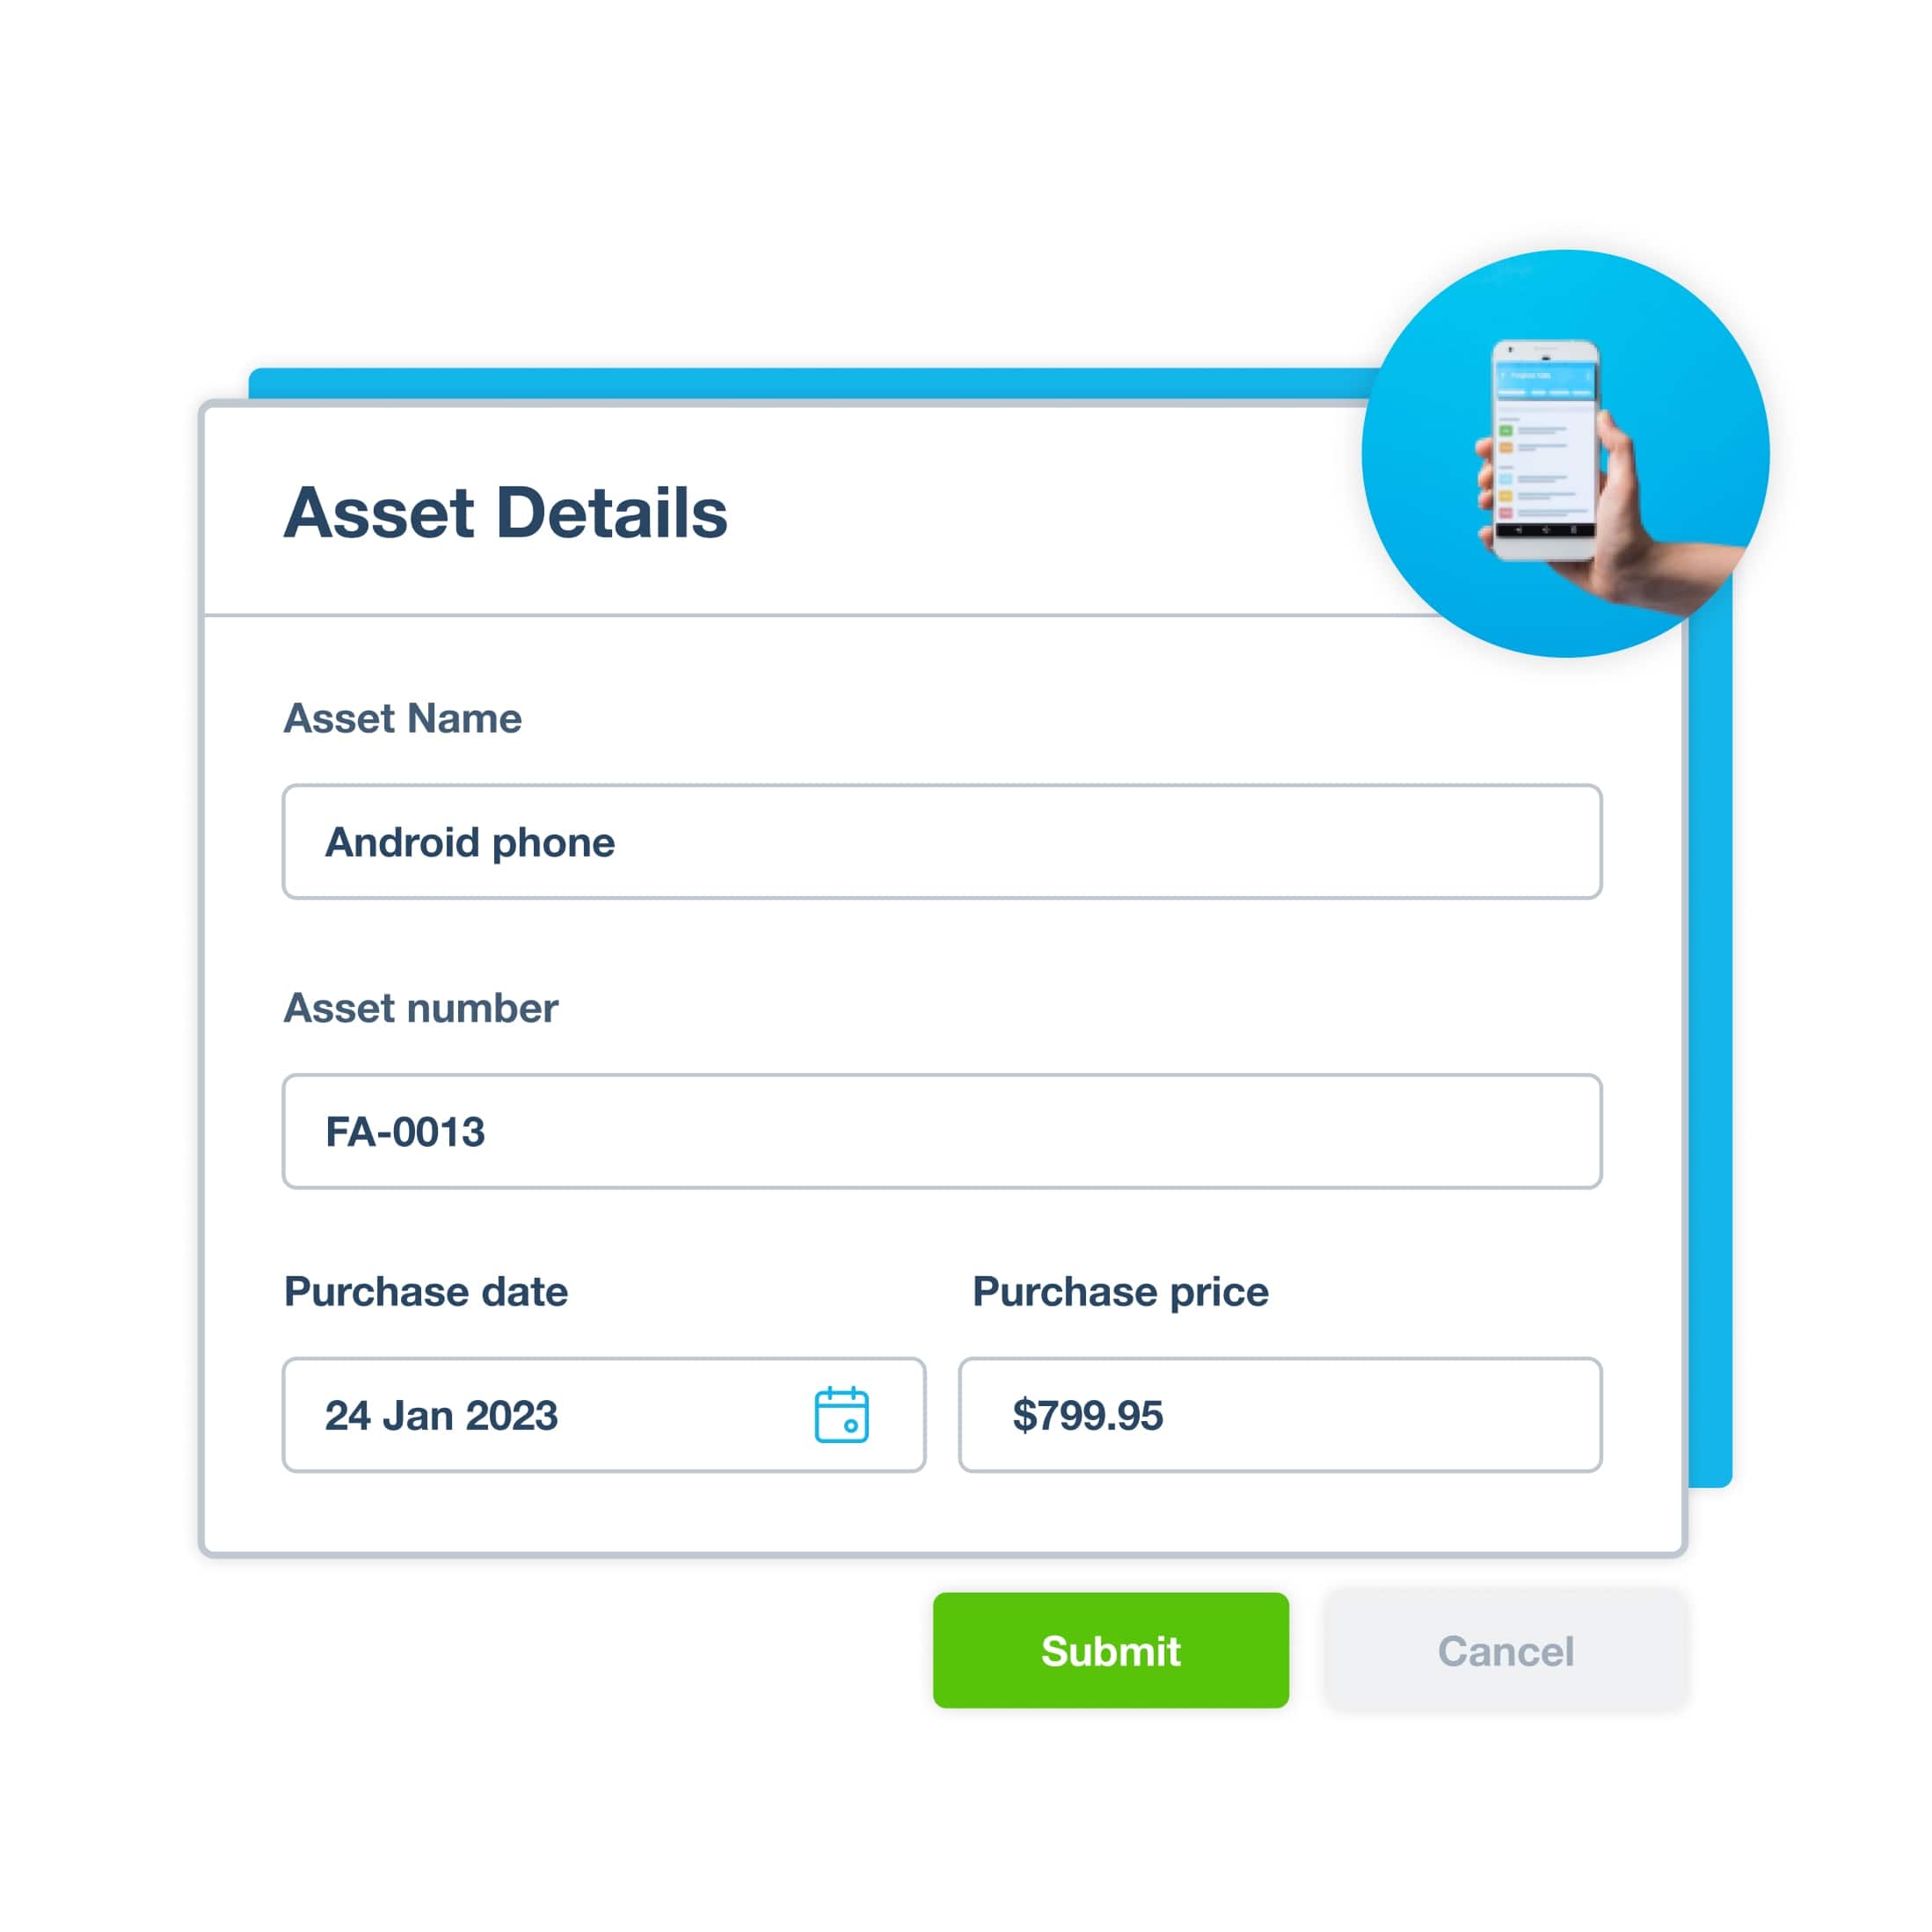 Details of a fixed asset are being added in Xero, including the asset name, number, purchase date and price.